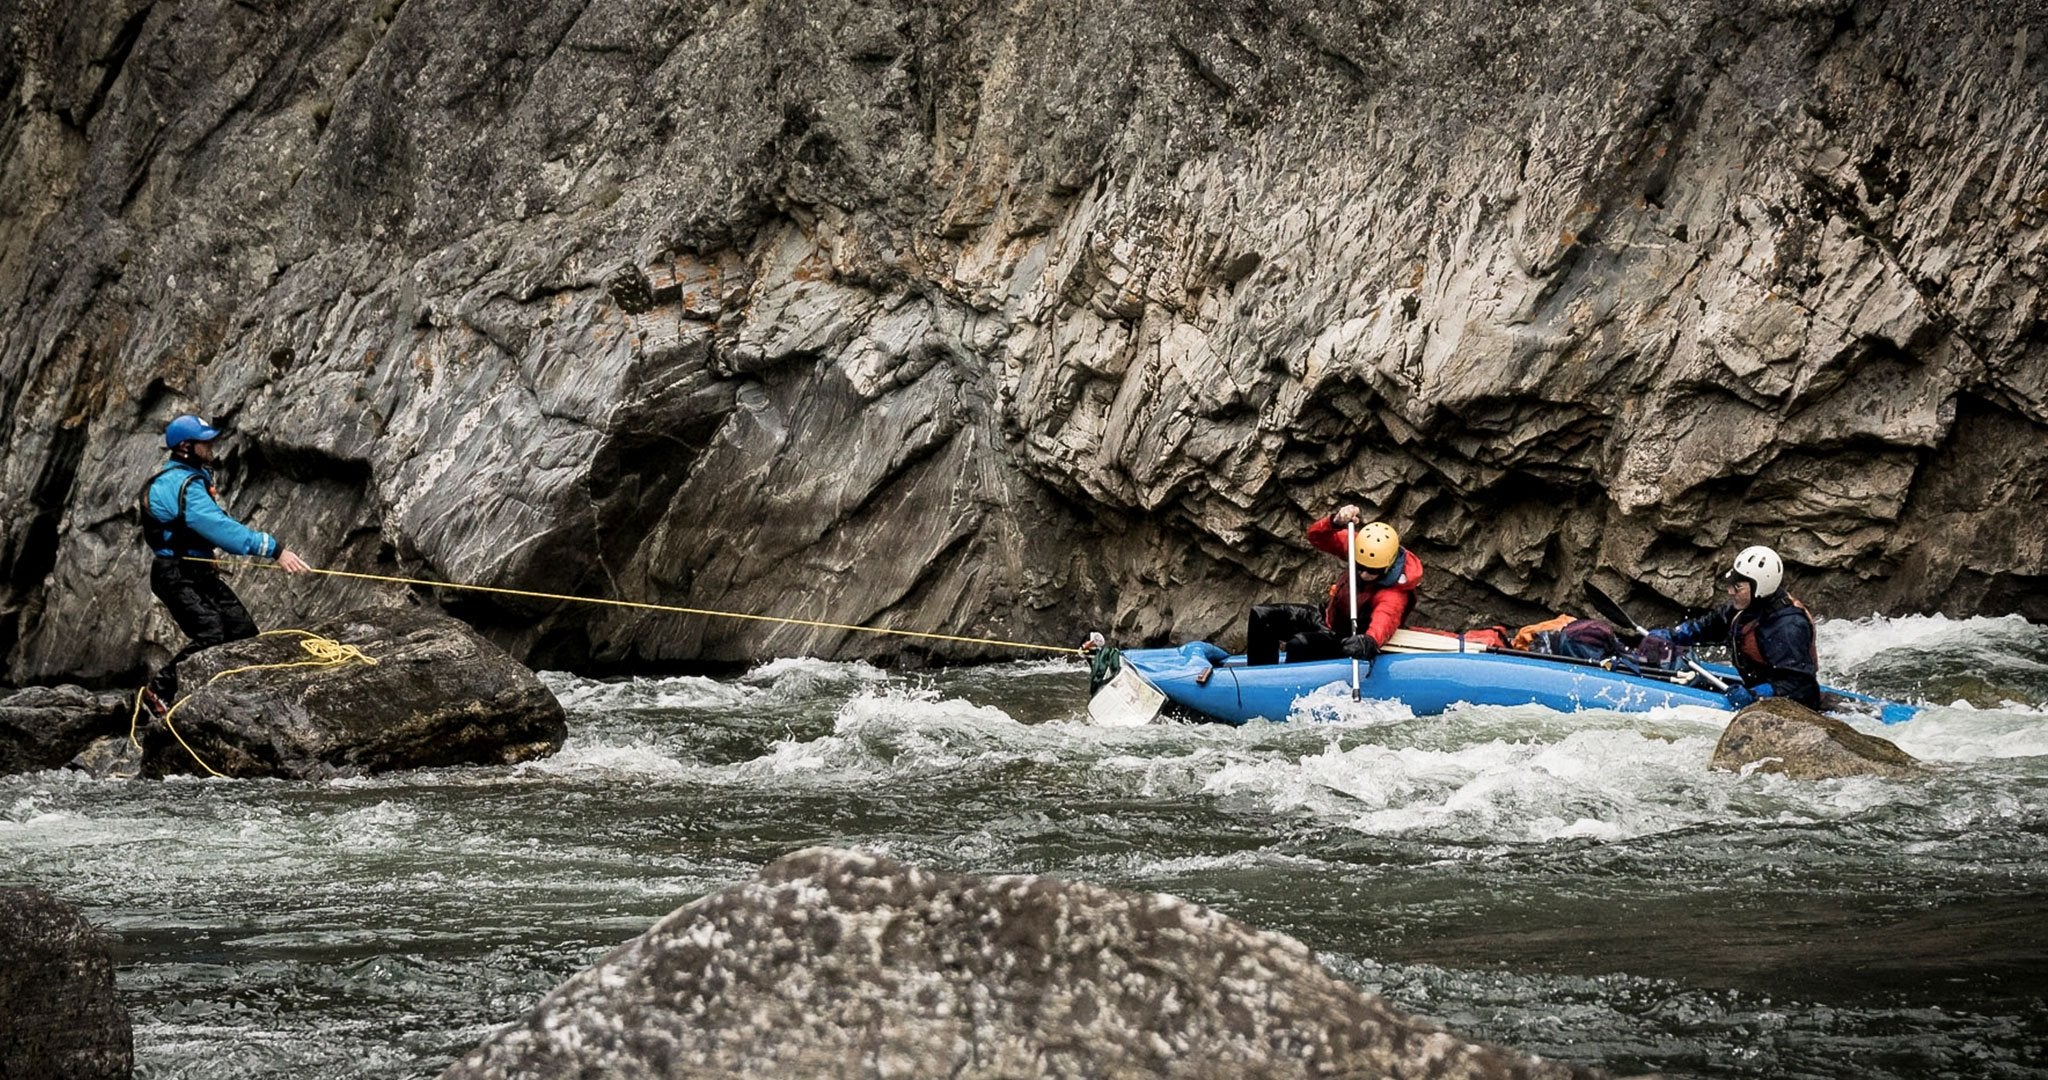 Whitewater Packrafting 101: 10 Things You Need to Know to Paddle Safe + Strong